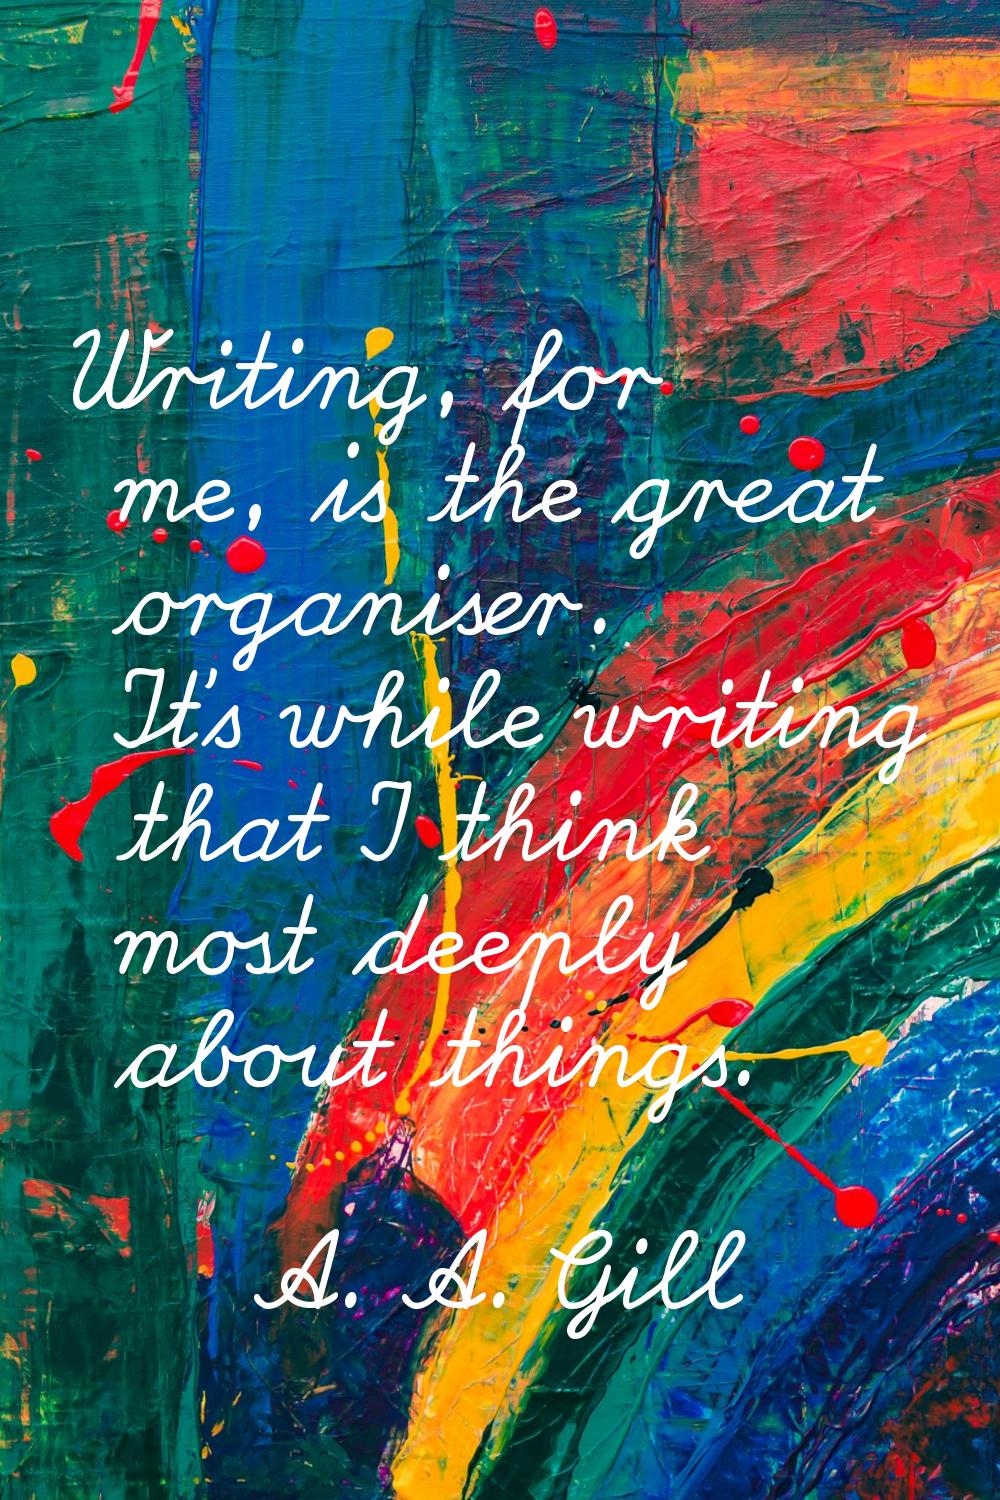 Writing, for me, is the great organiser. It's while writing that I think most deeply about things.